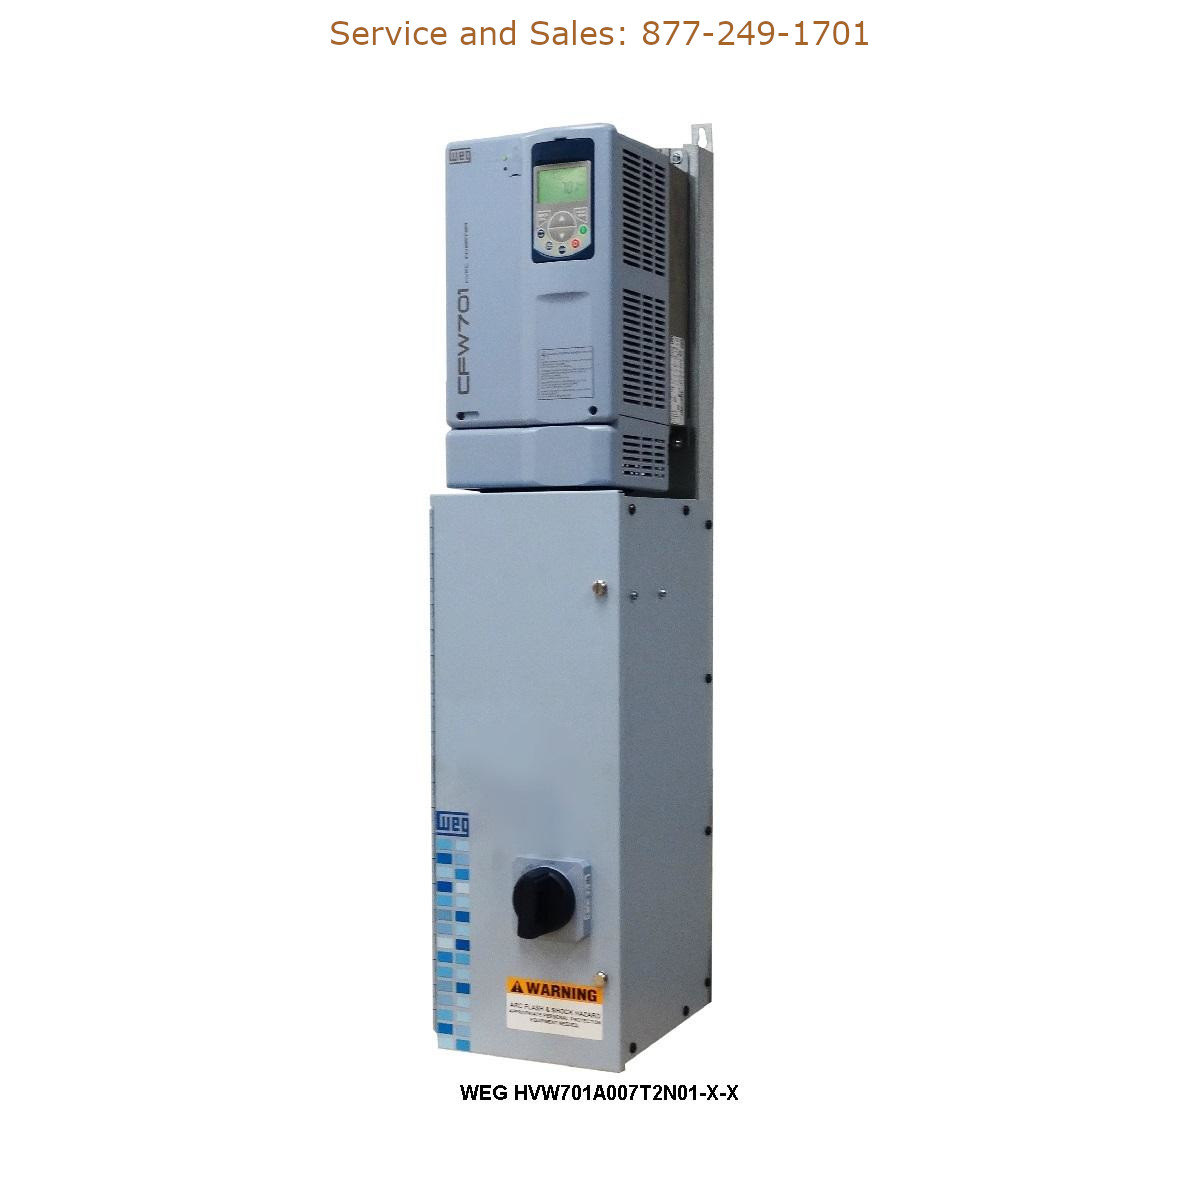 WEG HVW701A007T2N01-X-X WEG Model Number HVW701A007T2N01-X-X WEG Drives, Variable Speed Drives Repair Service, Troubleshooting, Replacement Parts https://gesrepair.com/wp-content/uploads/2022/WEG/WEG_HVW701A007T2N01-X-X_Drives_Variable_Speed_Drives.jpg